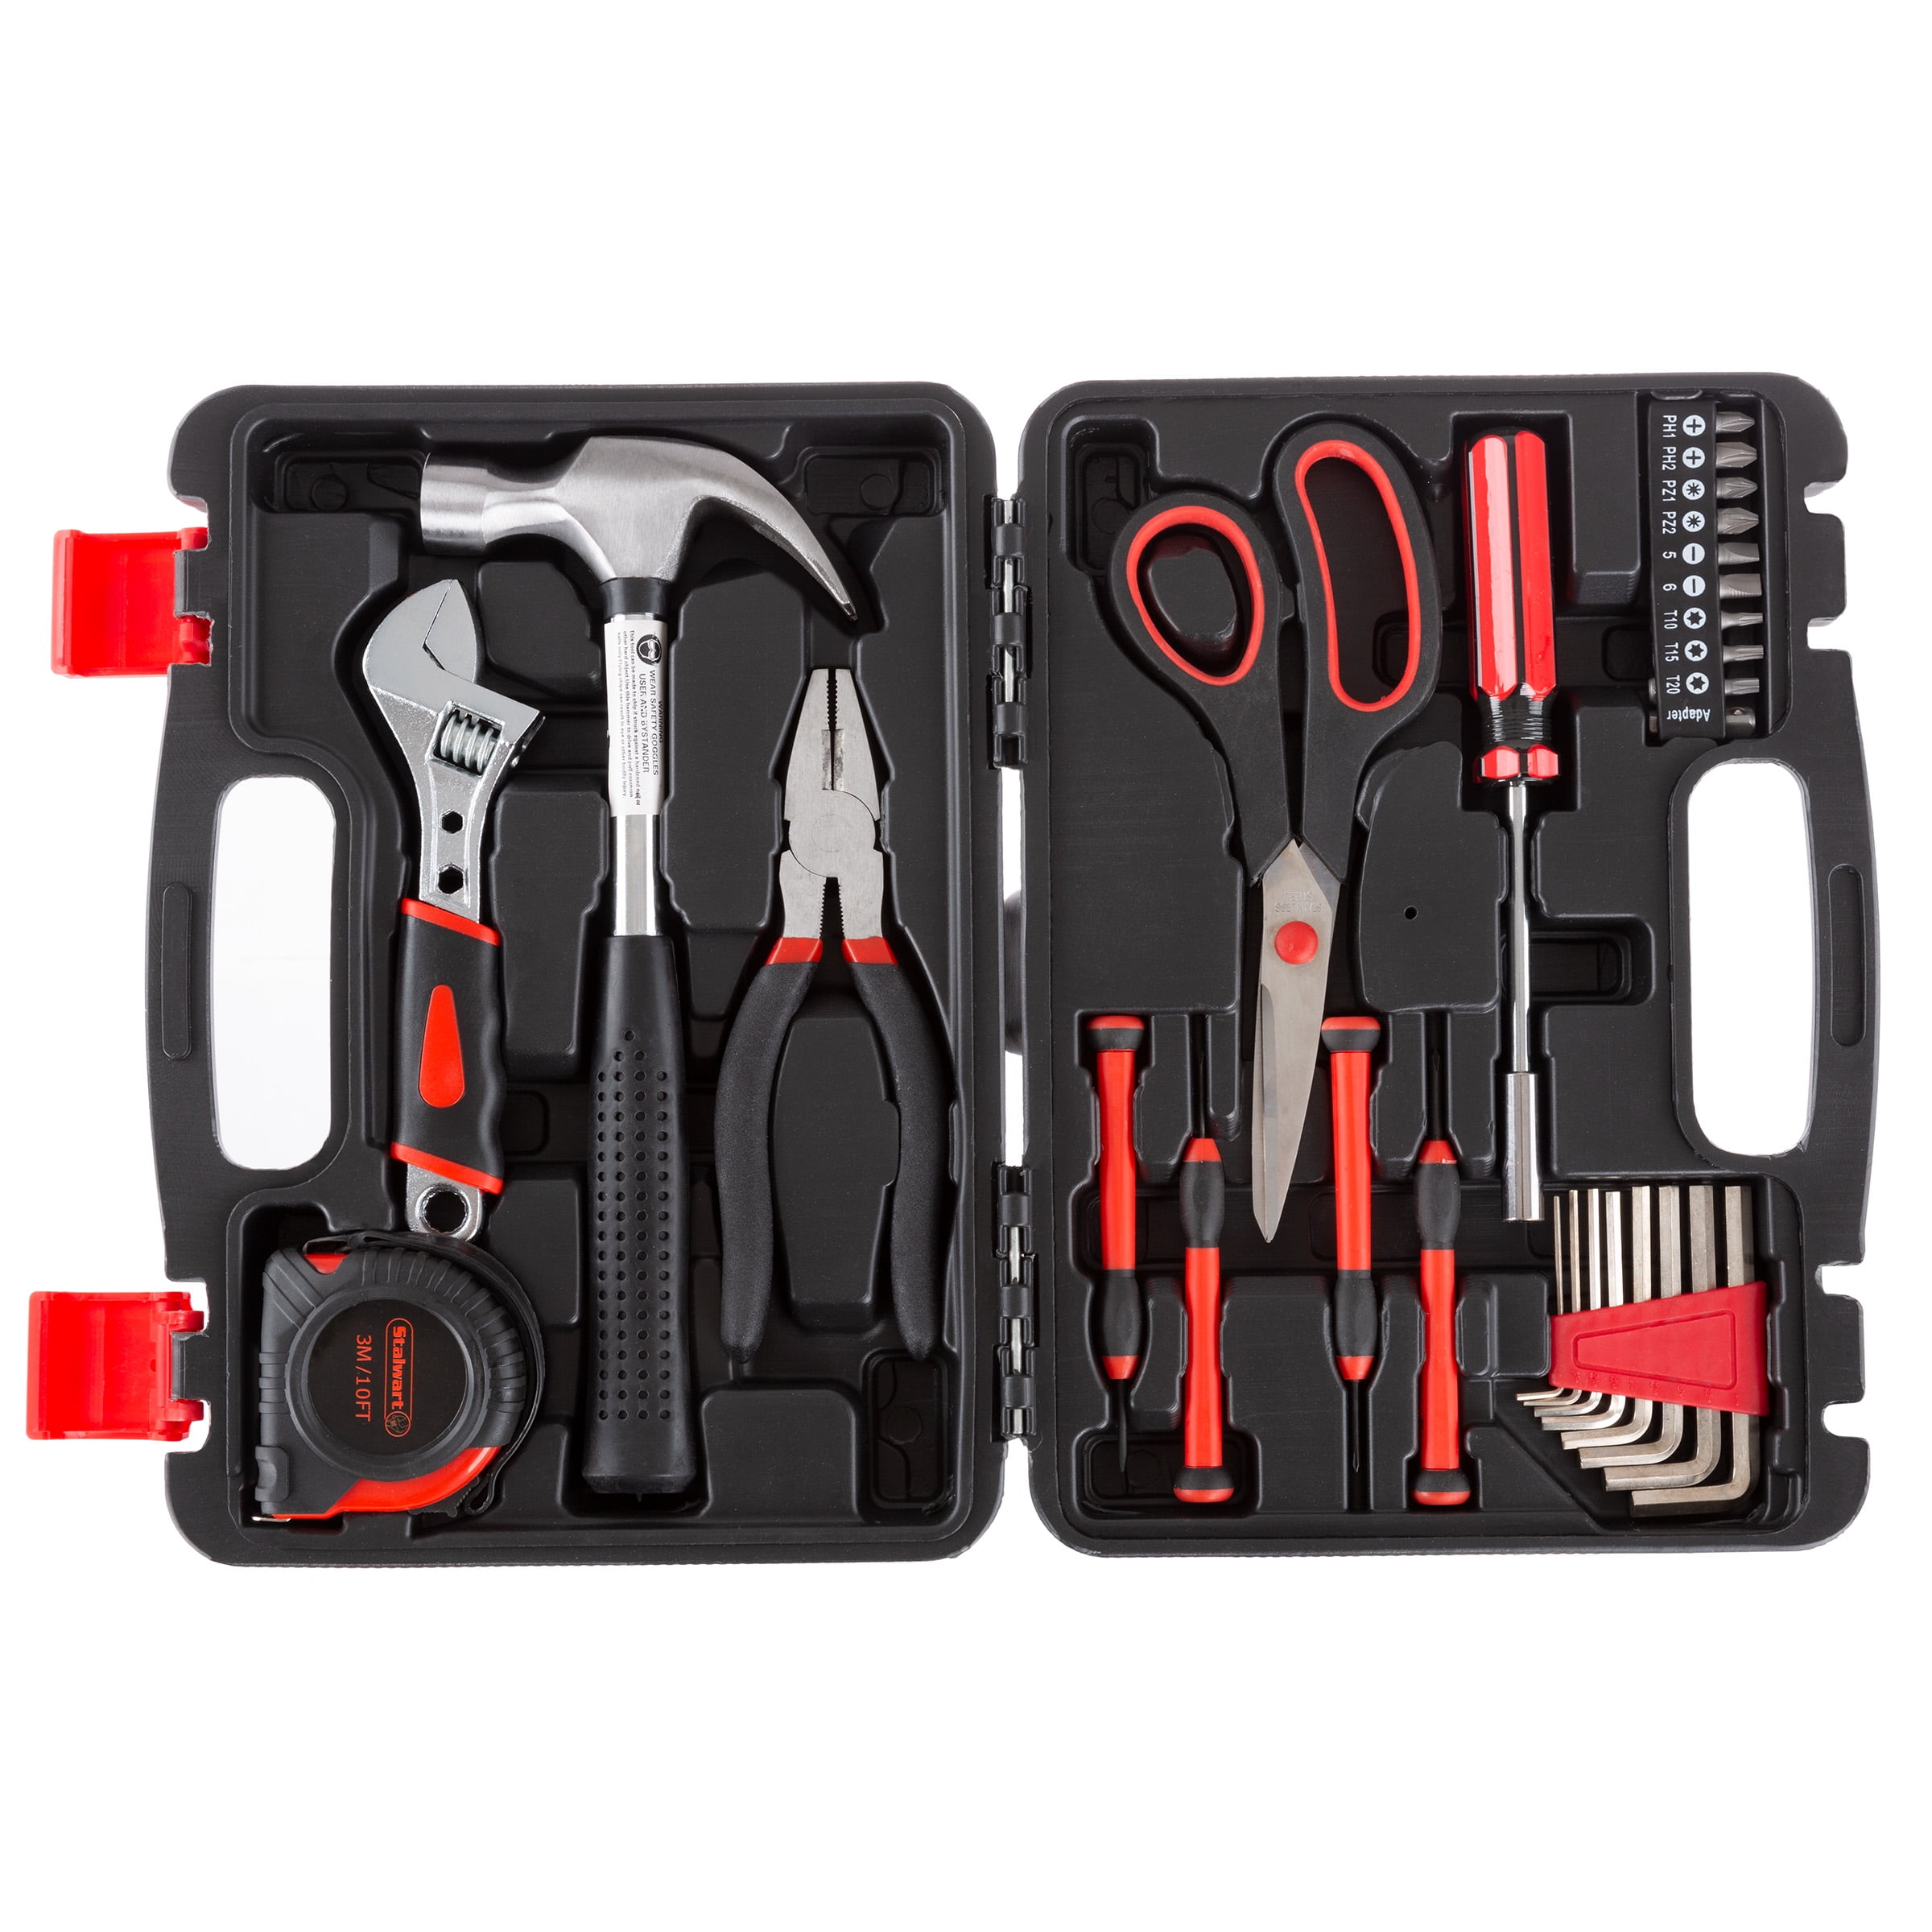 Tool Kit 28 Heat-Treated Pieces with Carrying Case Essential Steel Hand  Tool and Basic Repair Set for Apartments, Dorm, Homeowners by Stalwart 